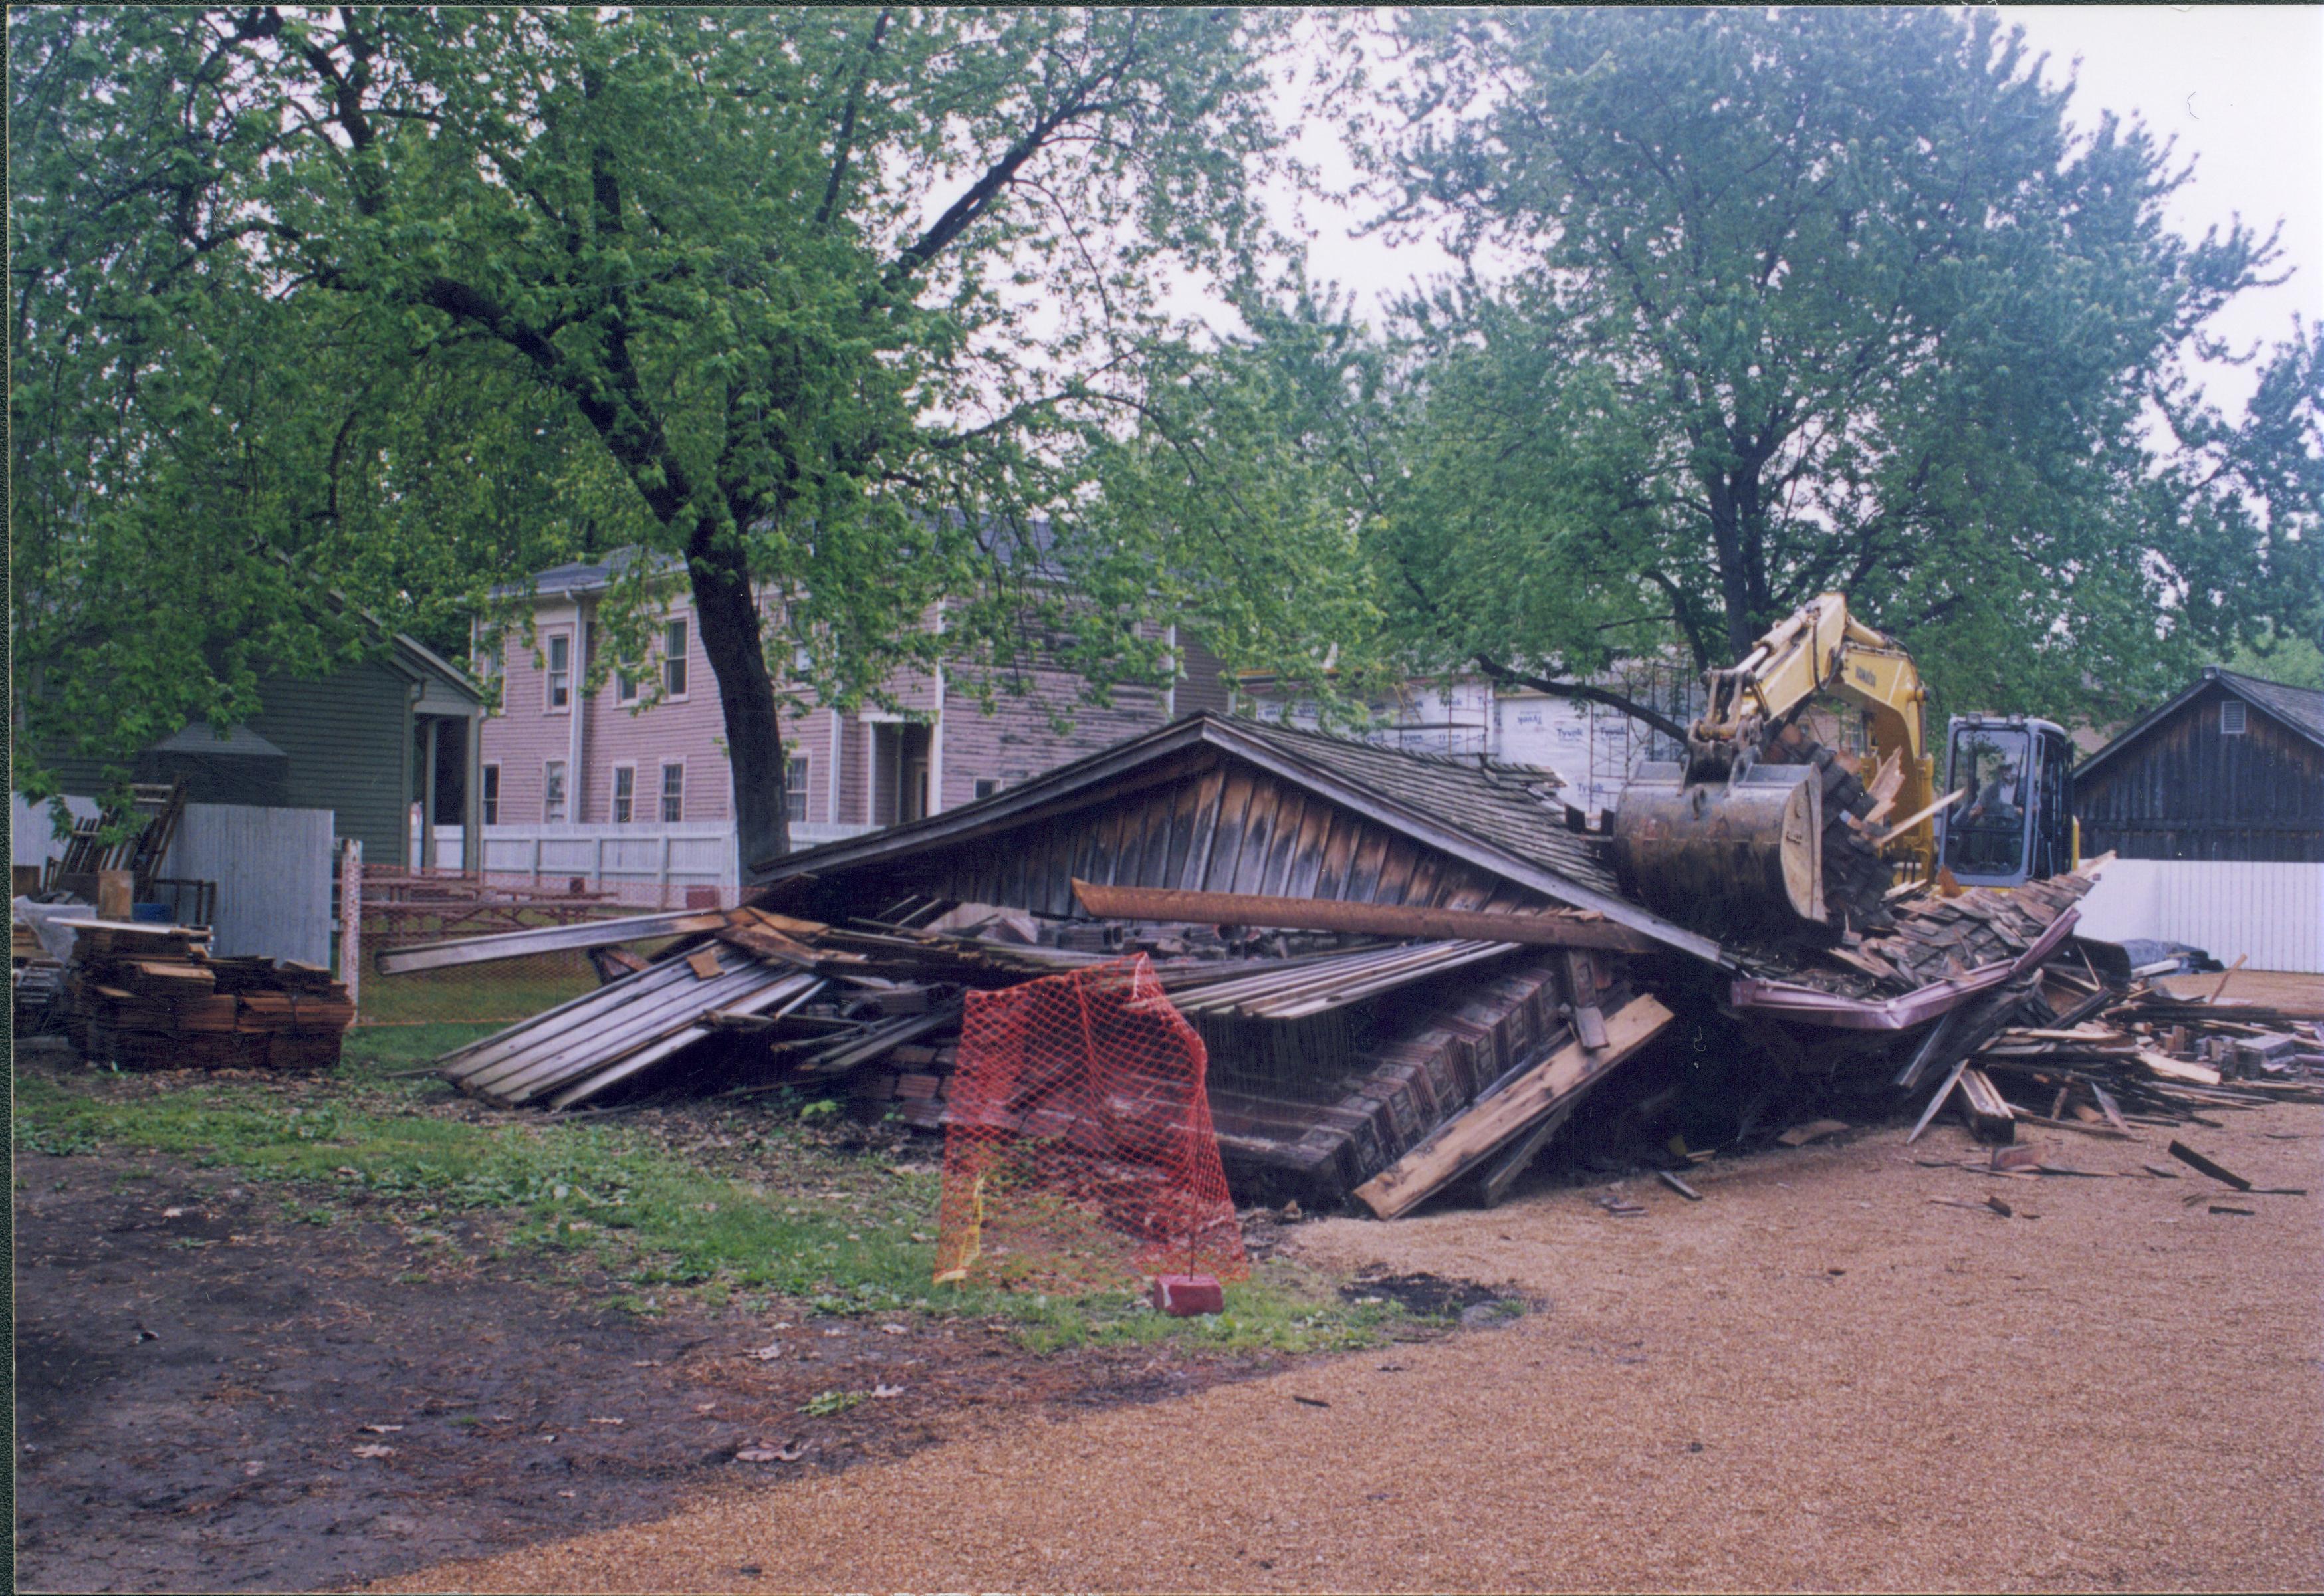 Maintenance Shed removal - Sprigg shed tear down on non-historic barn. Maintenance Work Leader Vee Pollock operates crane. Sprigg House on far left, Miller House in background left. Maintenance shed in background right. Alley between 7th and 8th Street in foreground Looking Southeast from Jackson Street and alley intersection Sprigg, shed, demolition, Miller, alley, staff